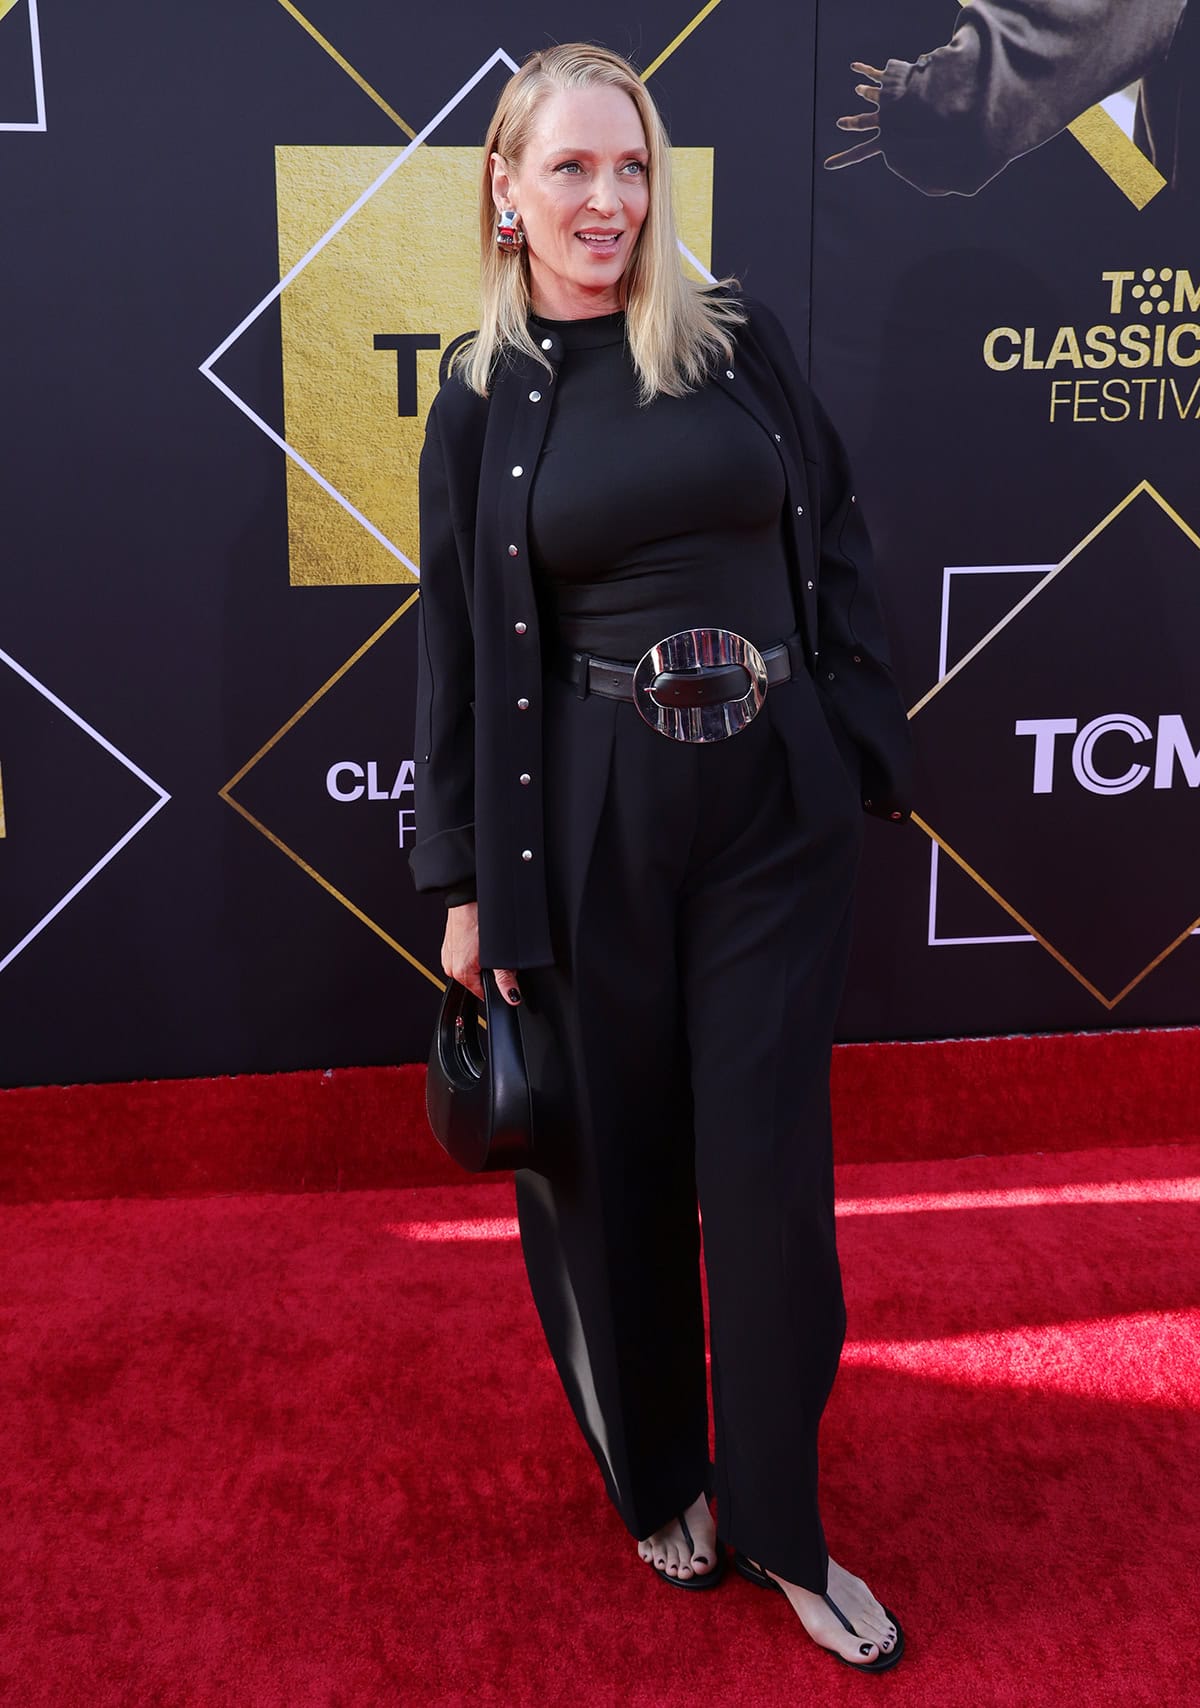 Uma Thurman, who plays Mia Wallace in Pulp Fiction, opts for an all-black ensemble featuring a form-fitting top, straight-leg trousers, and a black jacket